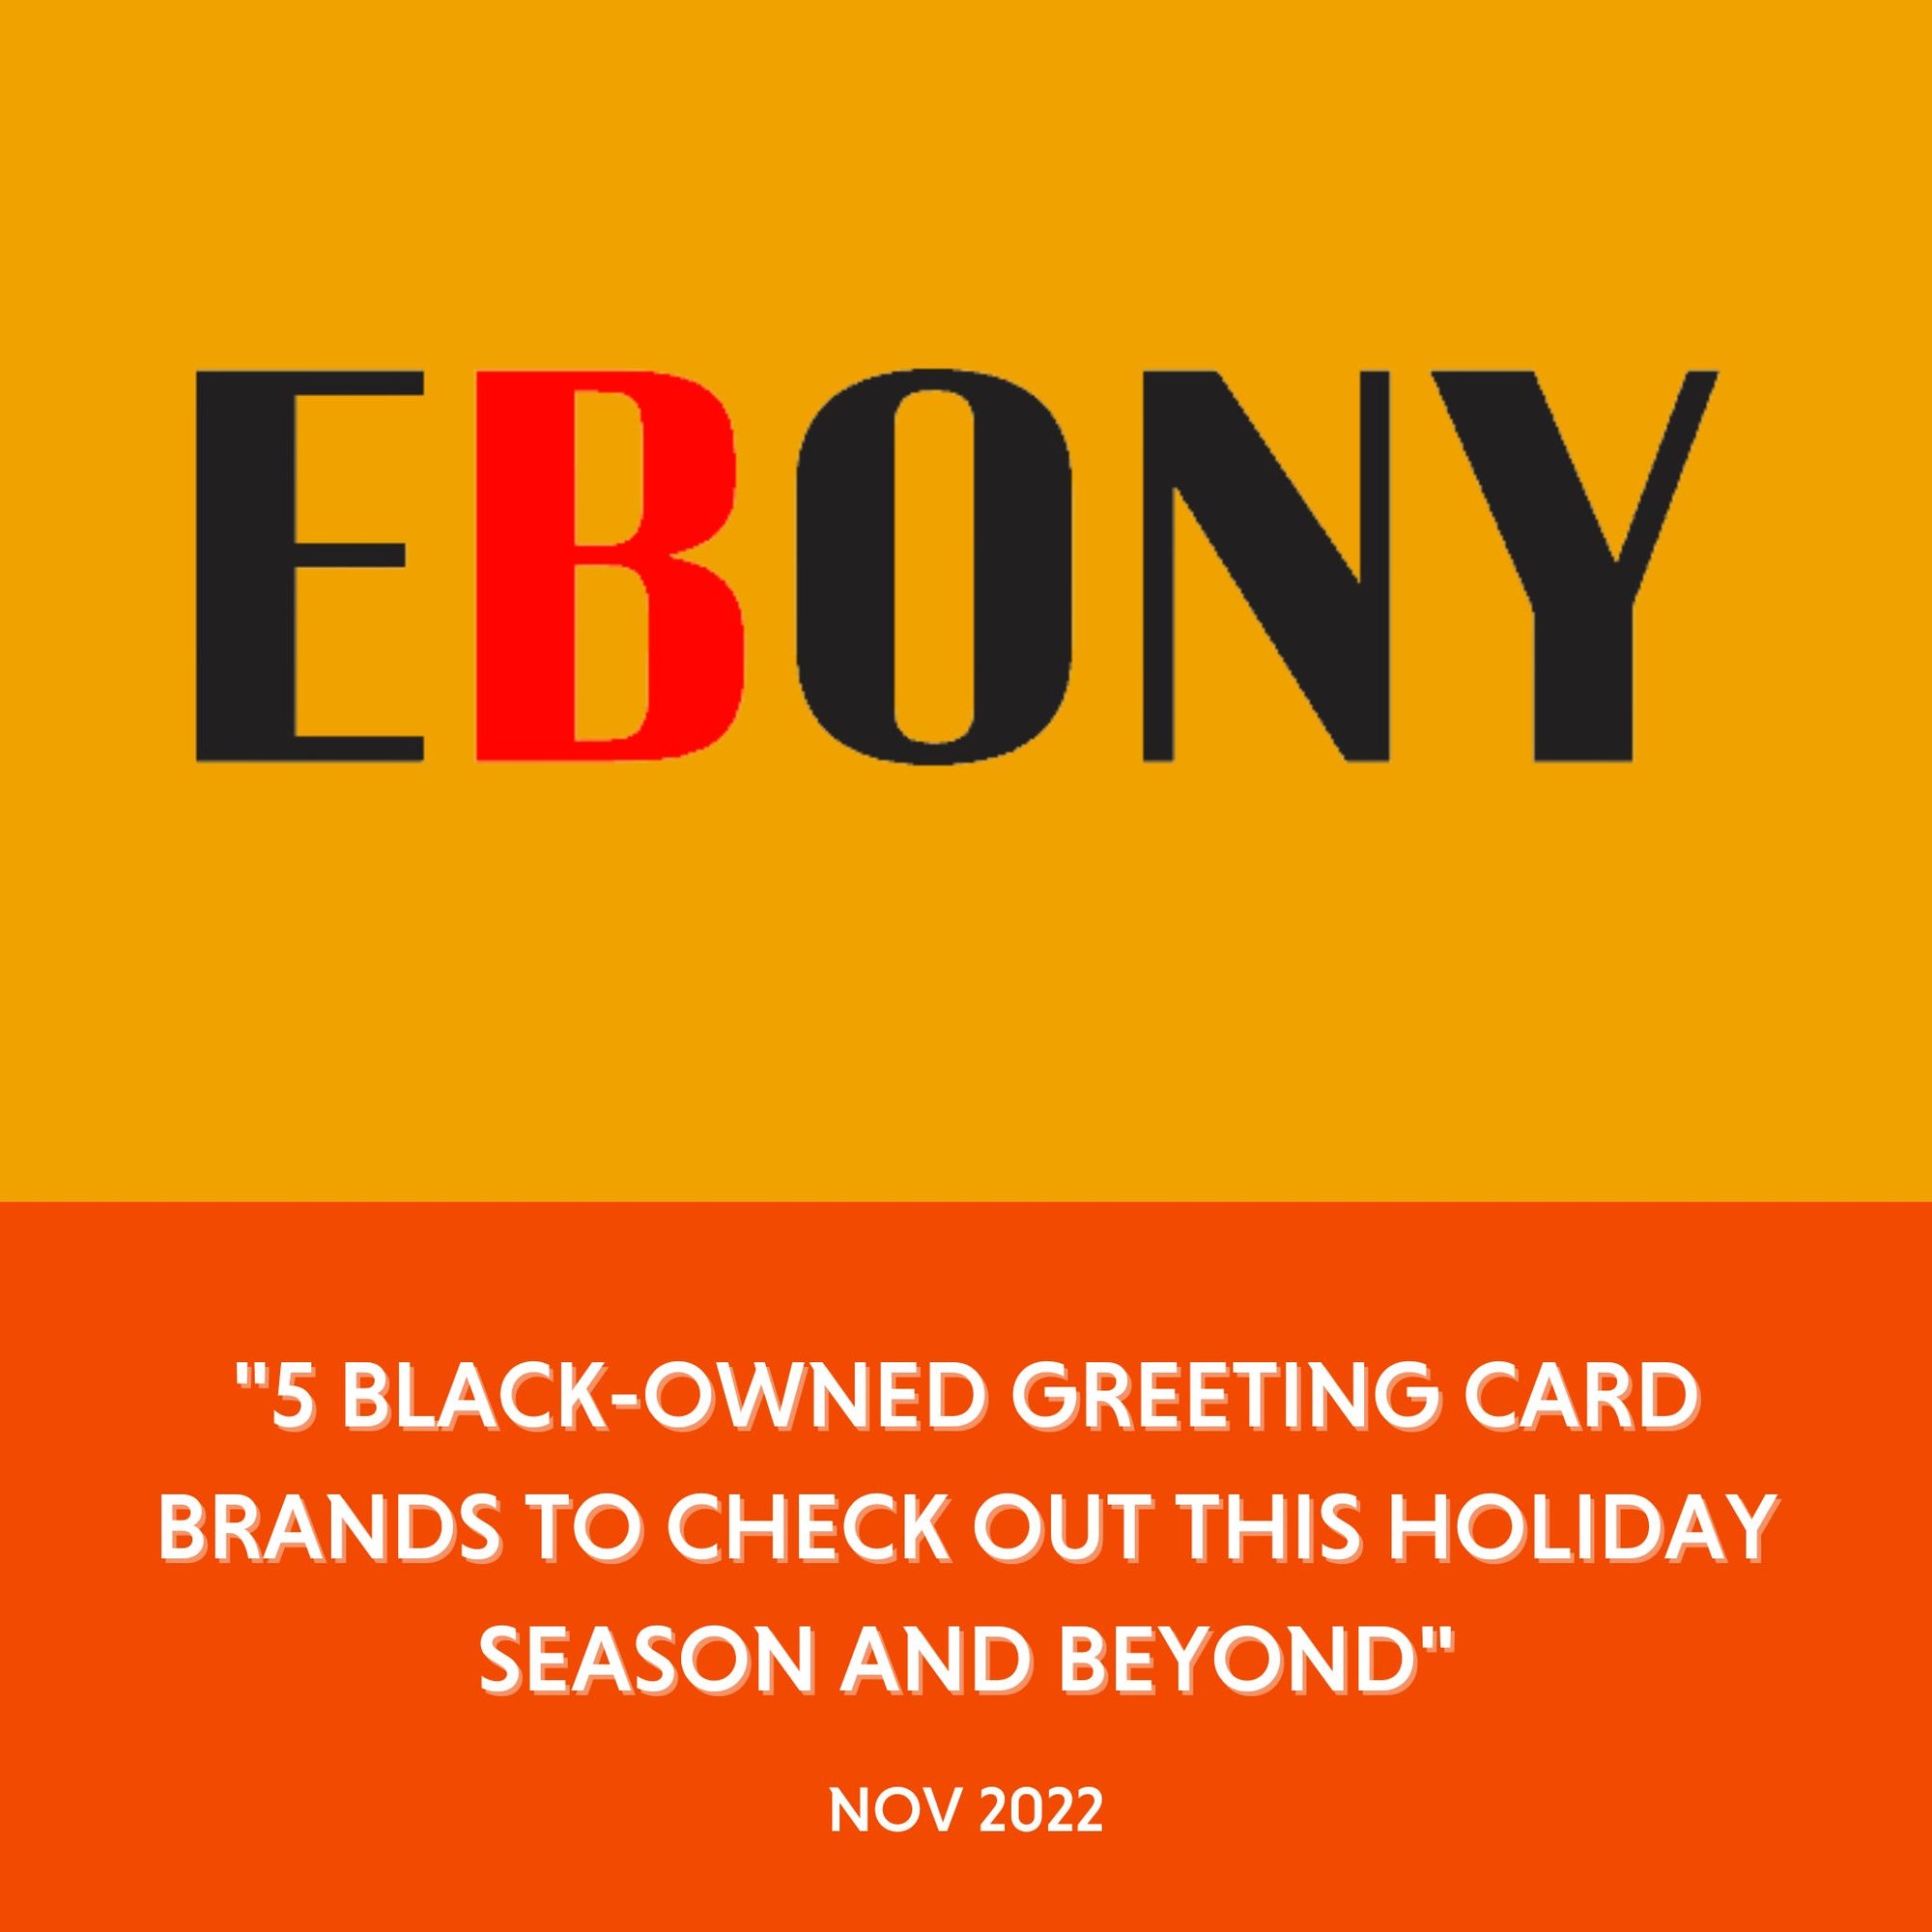 Ebony - "5 BLACK-OWNED GREETING CARD BRANDS TO CHECK OUT THIS HOLIDAY SEASON AND BEYOND" - Nov 2022